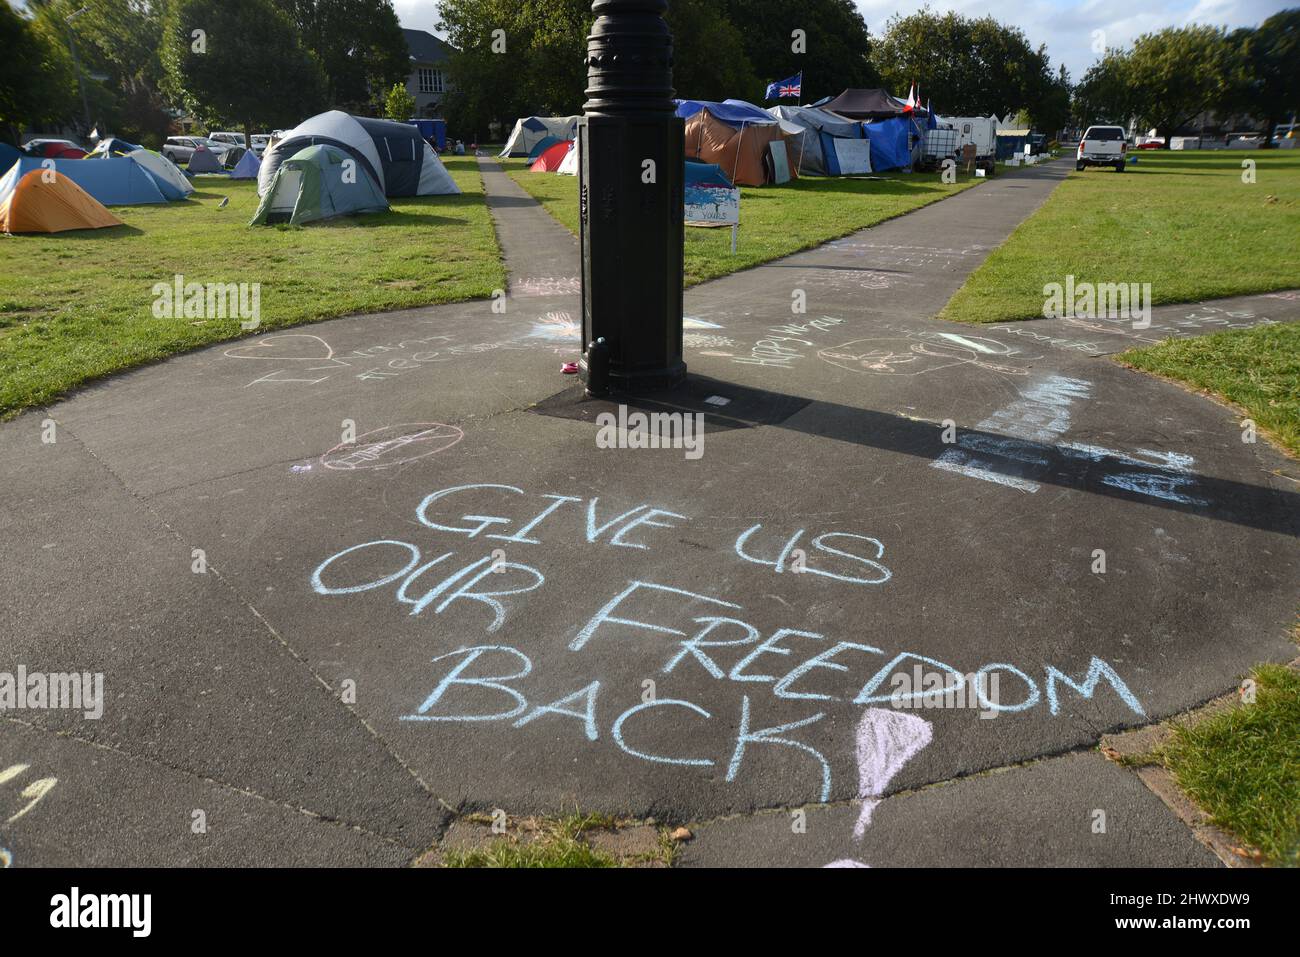 Christchurch, New Zealand, February 22, 2021: Sidewalk graffiti at the Cranmer Square mandate protest in Christchurch. Activists pitched tents and occupied the square peacefully for several weeks. Stock Photo